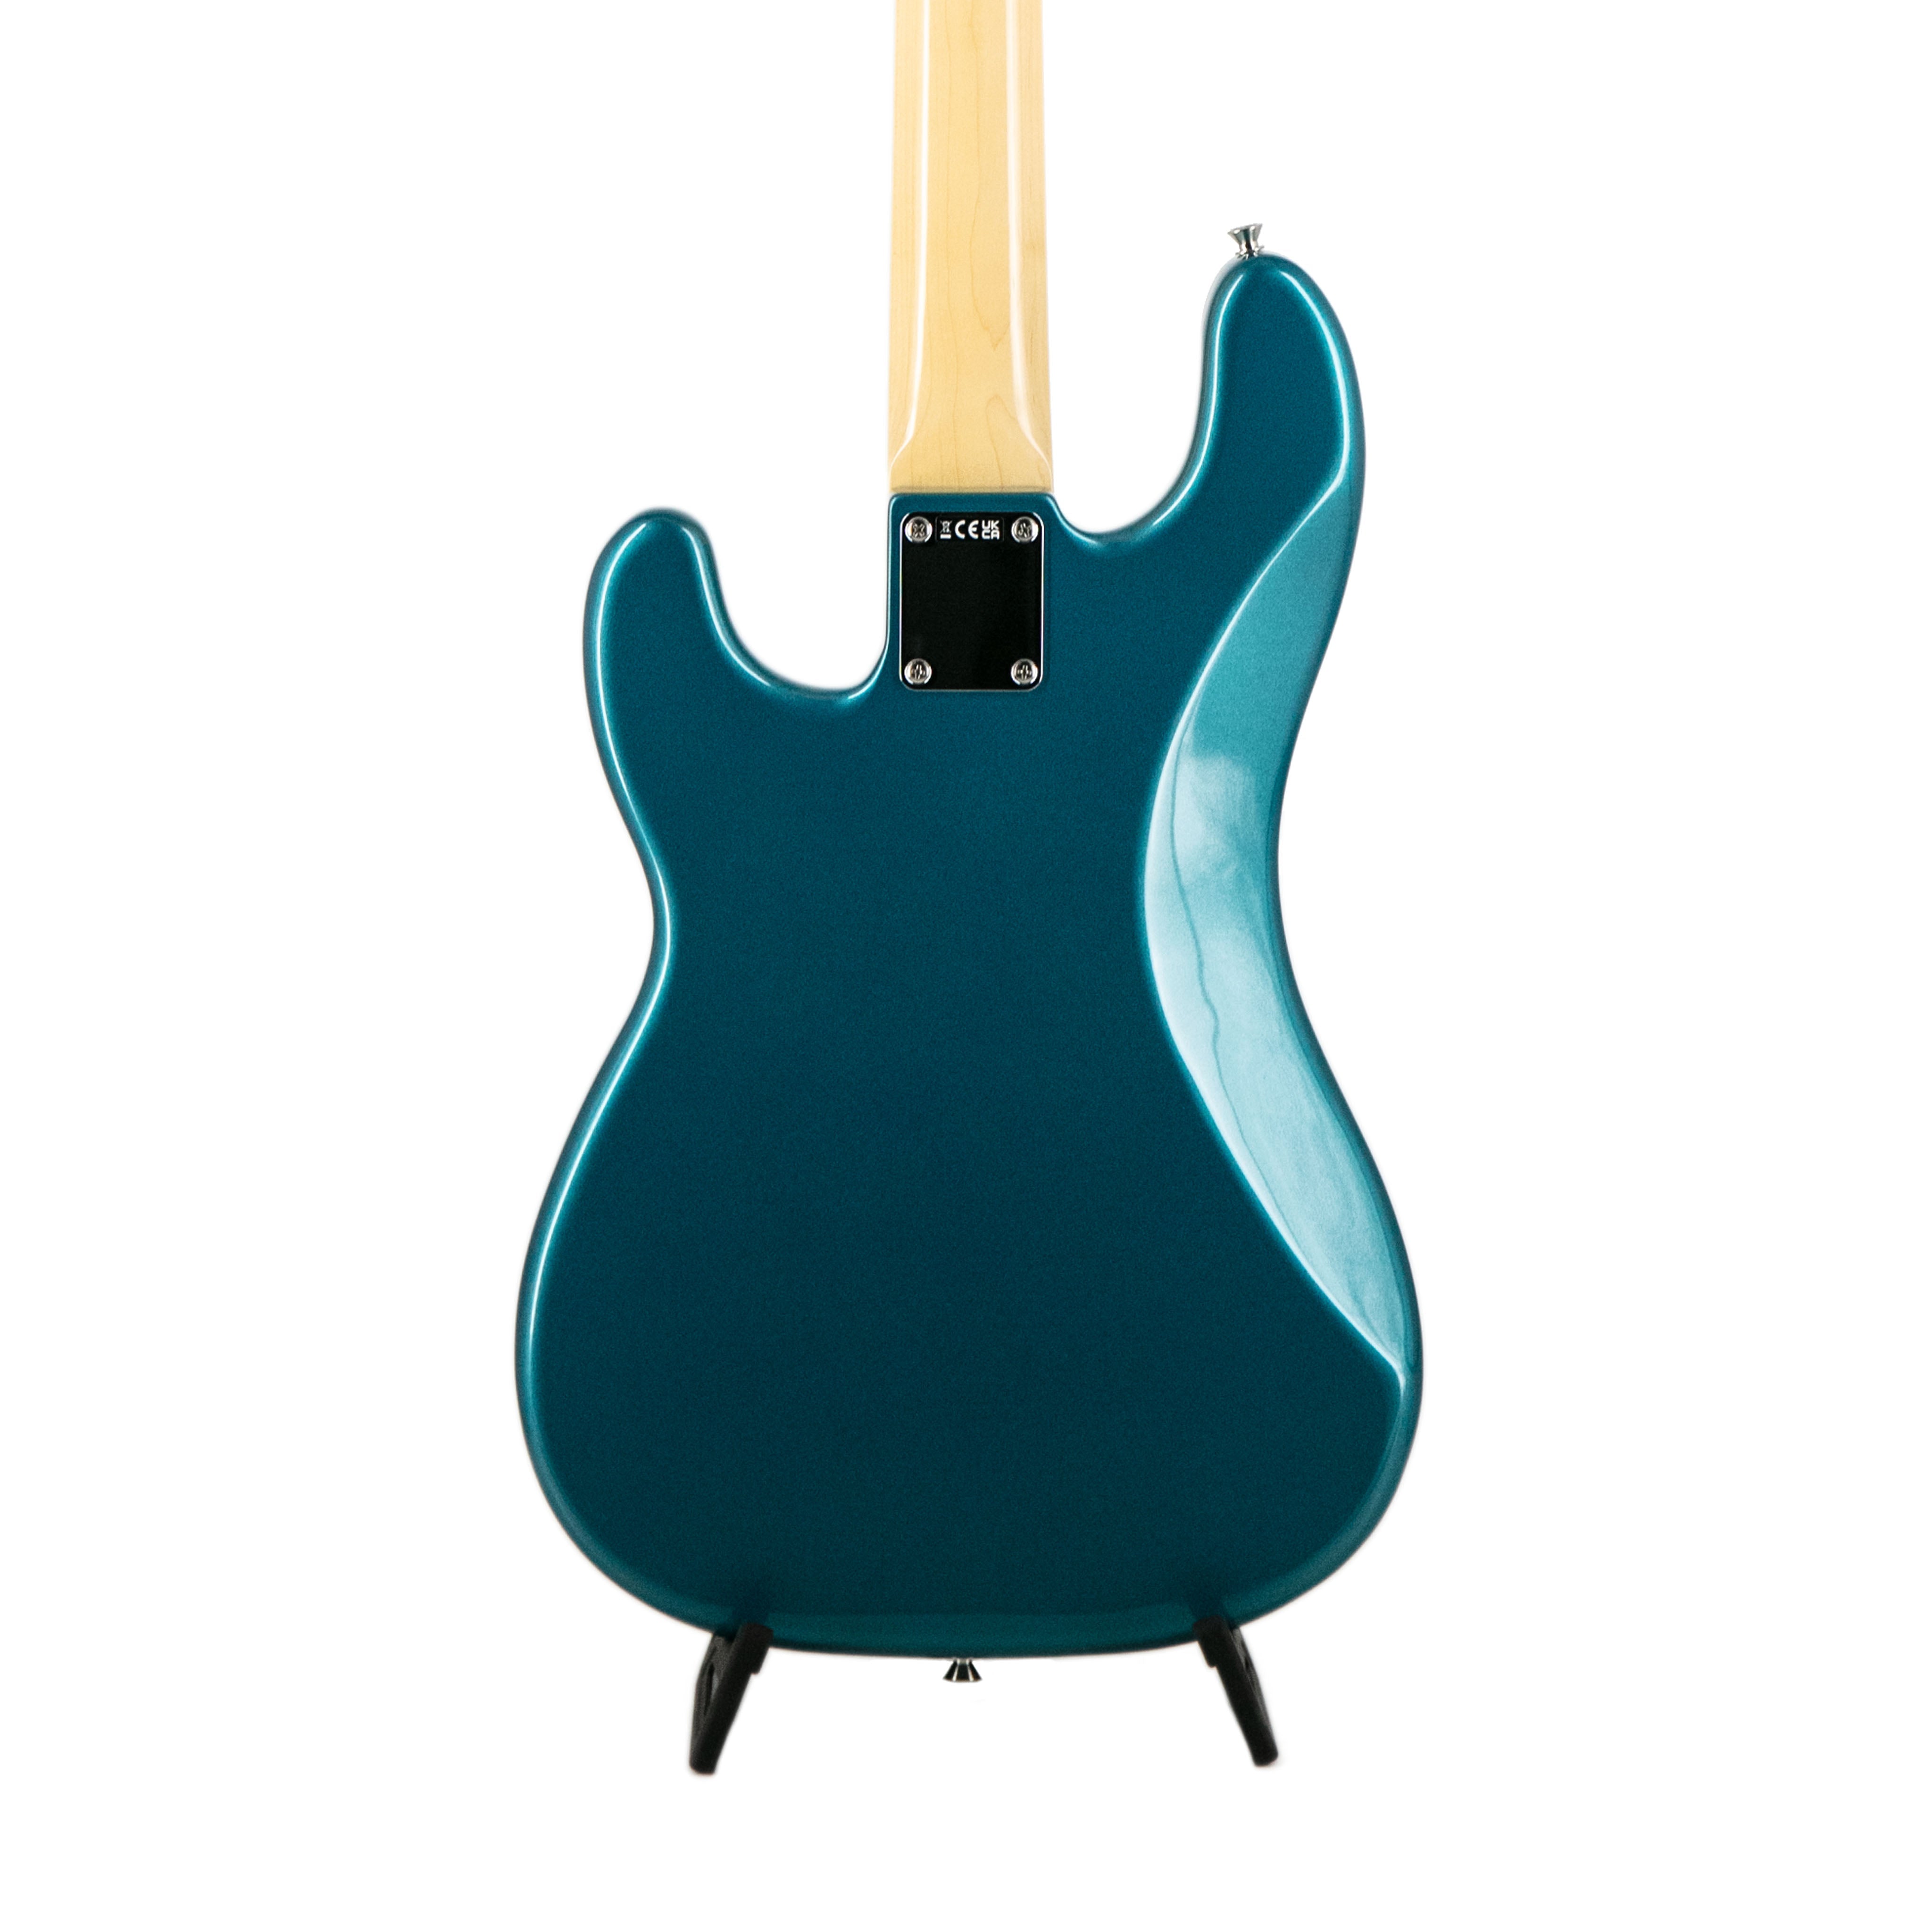 Fender FSR Collection Traditional 60s Precision Bass Guitar, RW FB, Ocean Turquoise Metallic